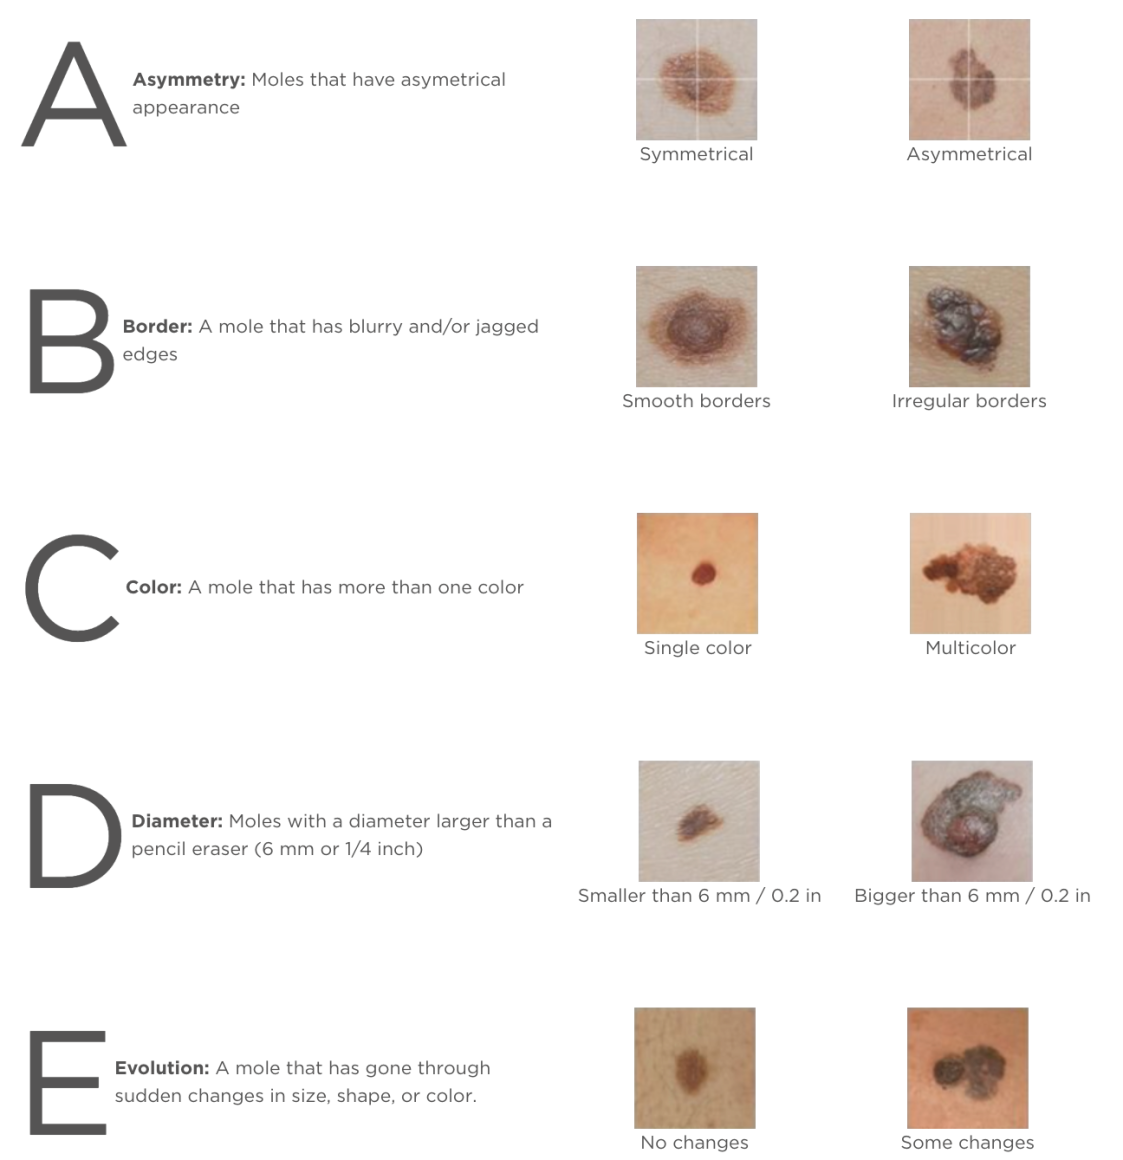 Photos and descriptions of the ABCDEs of Melanoma